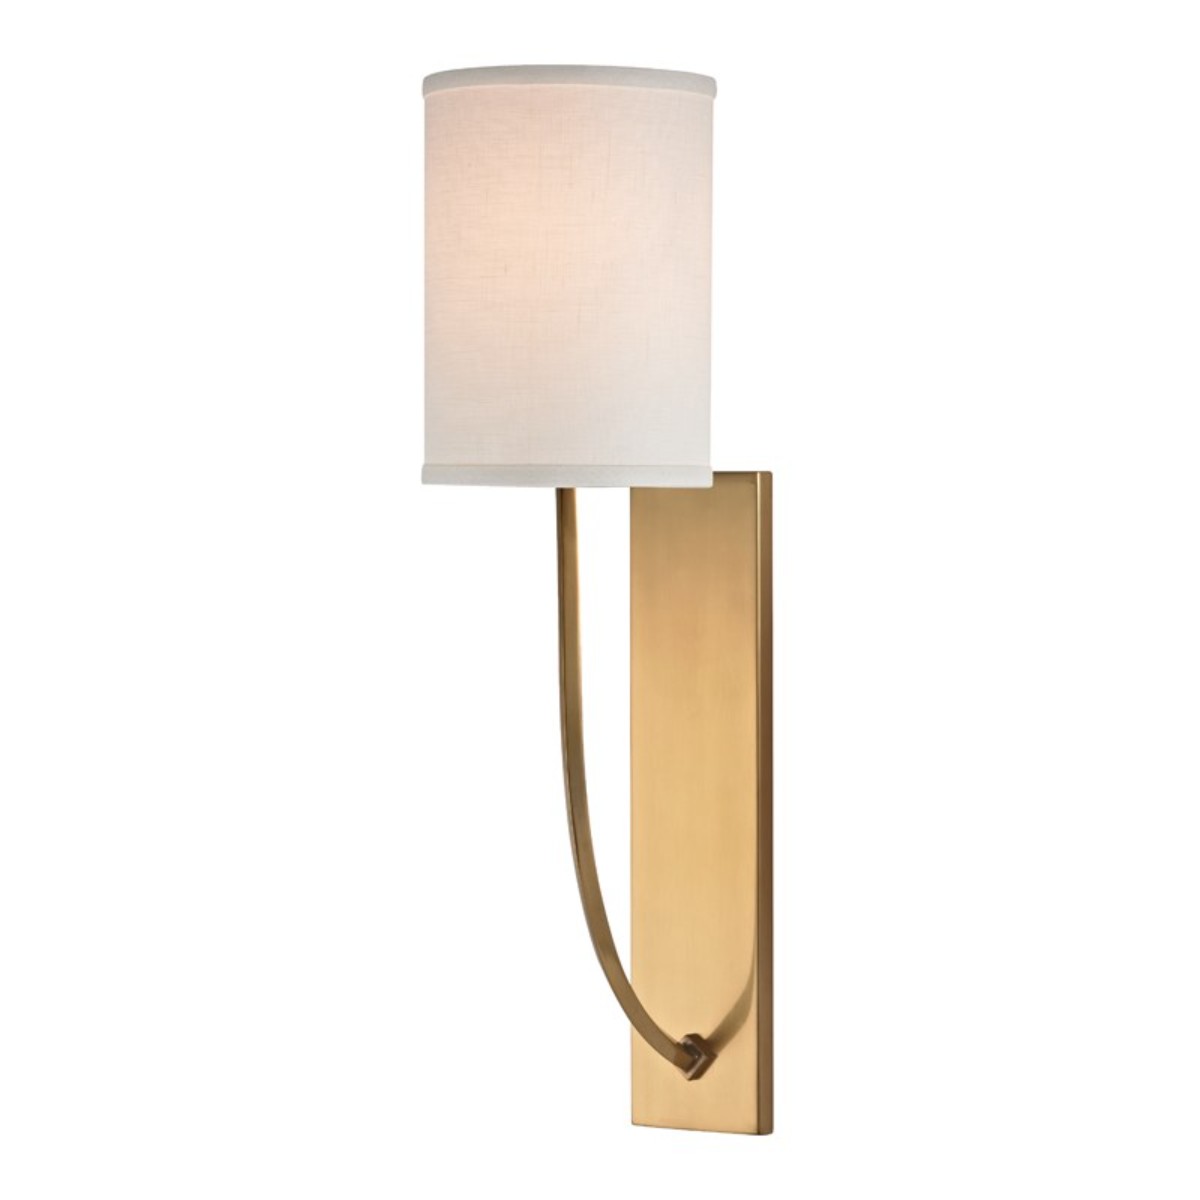 Hudson Valley | Colton Wall Light | Aged Brass